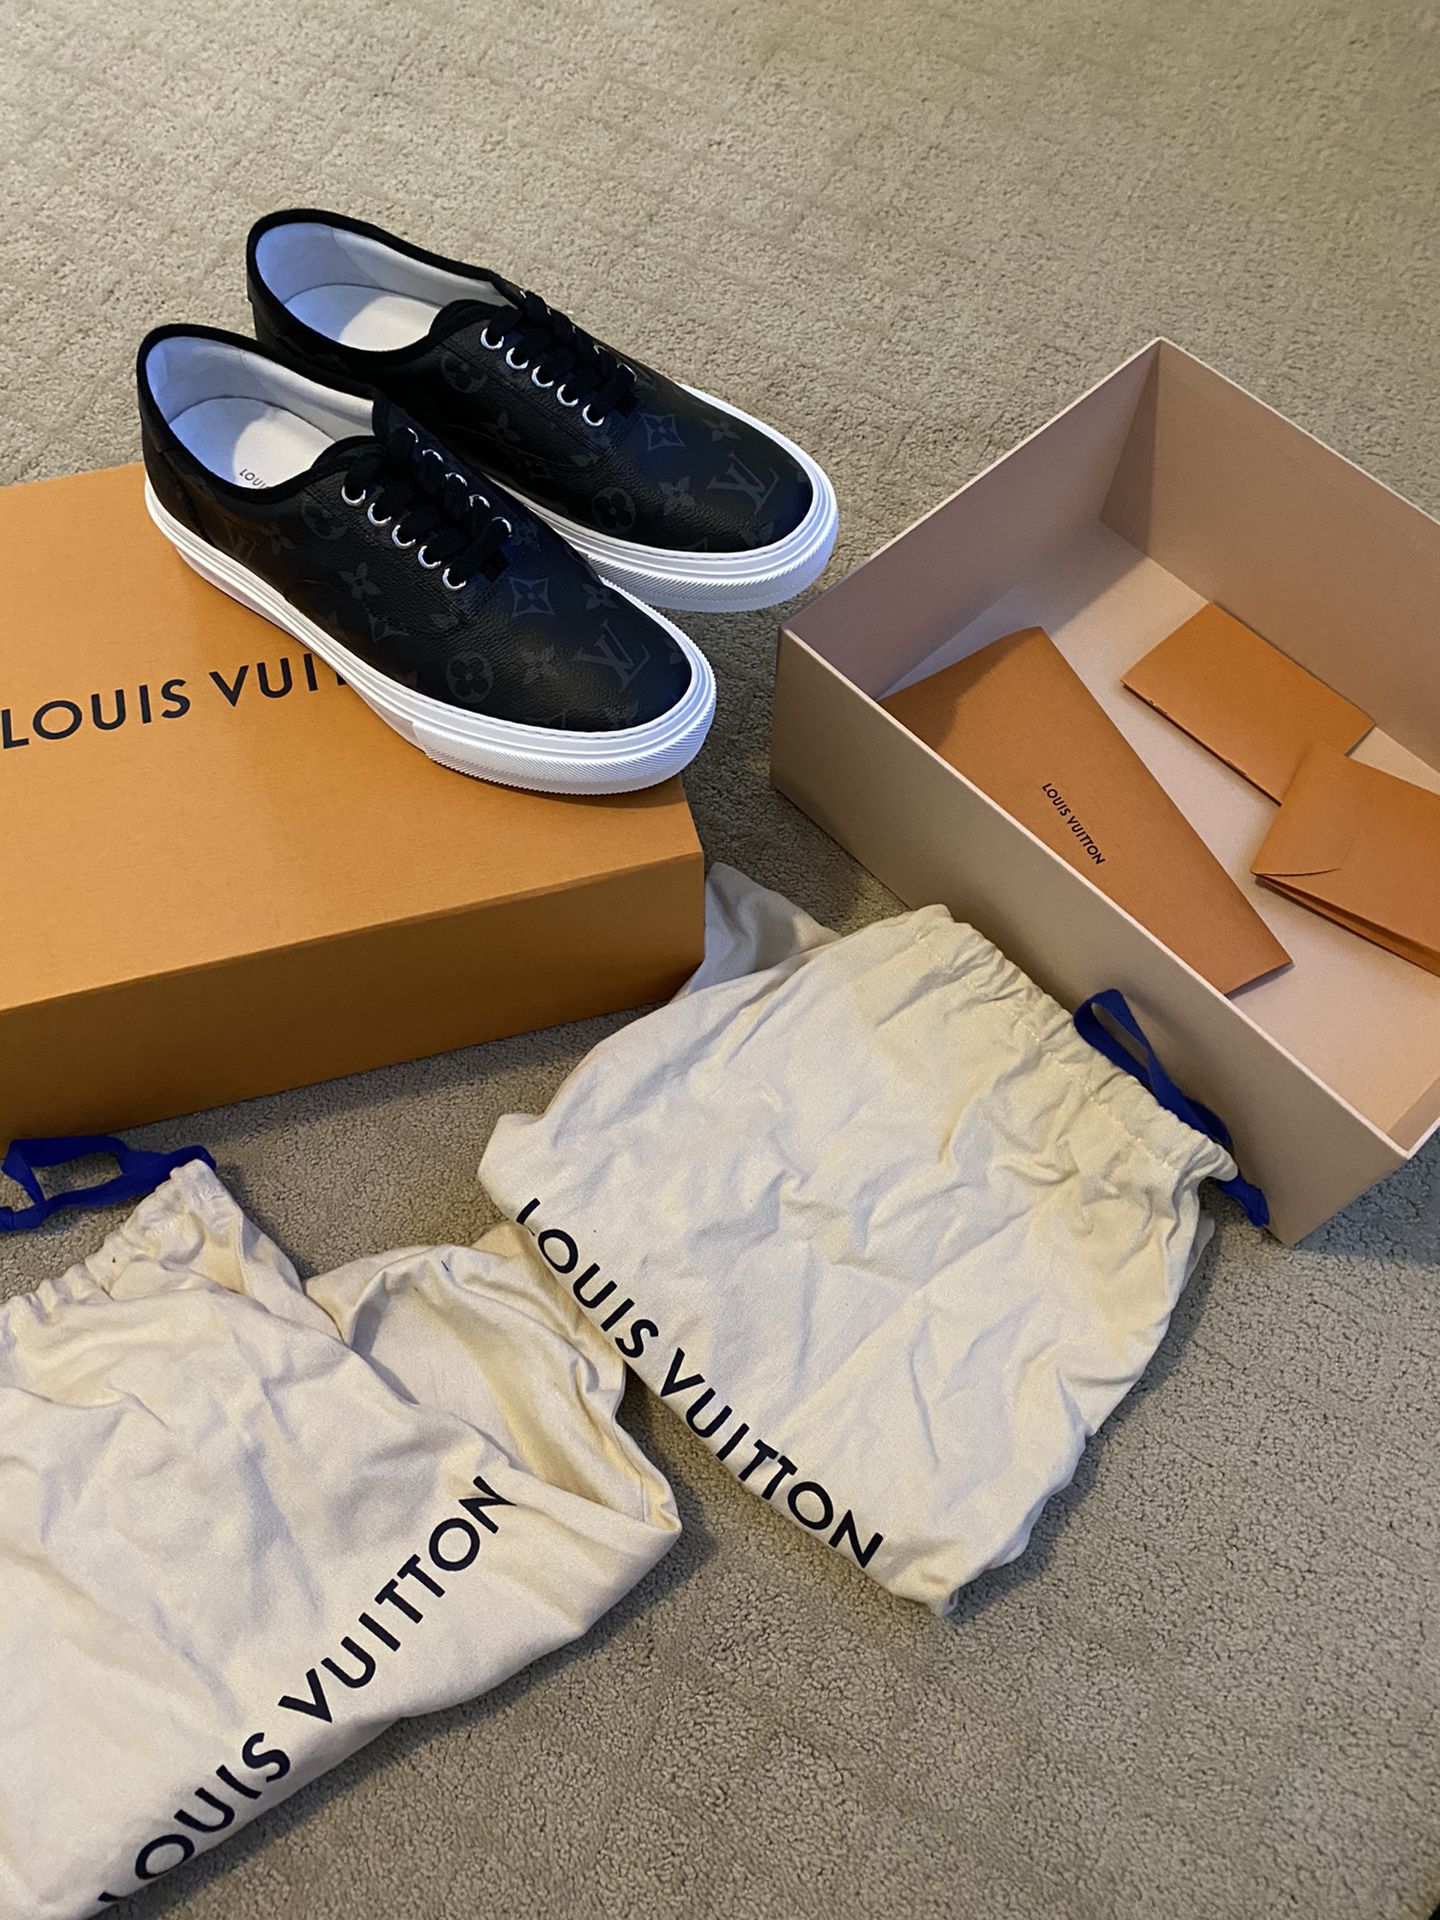 DS Louis Vuitton Trocadero sneakers for Sale in San Diego, CA